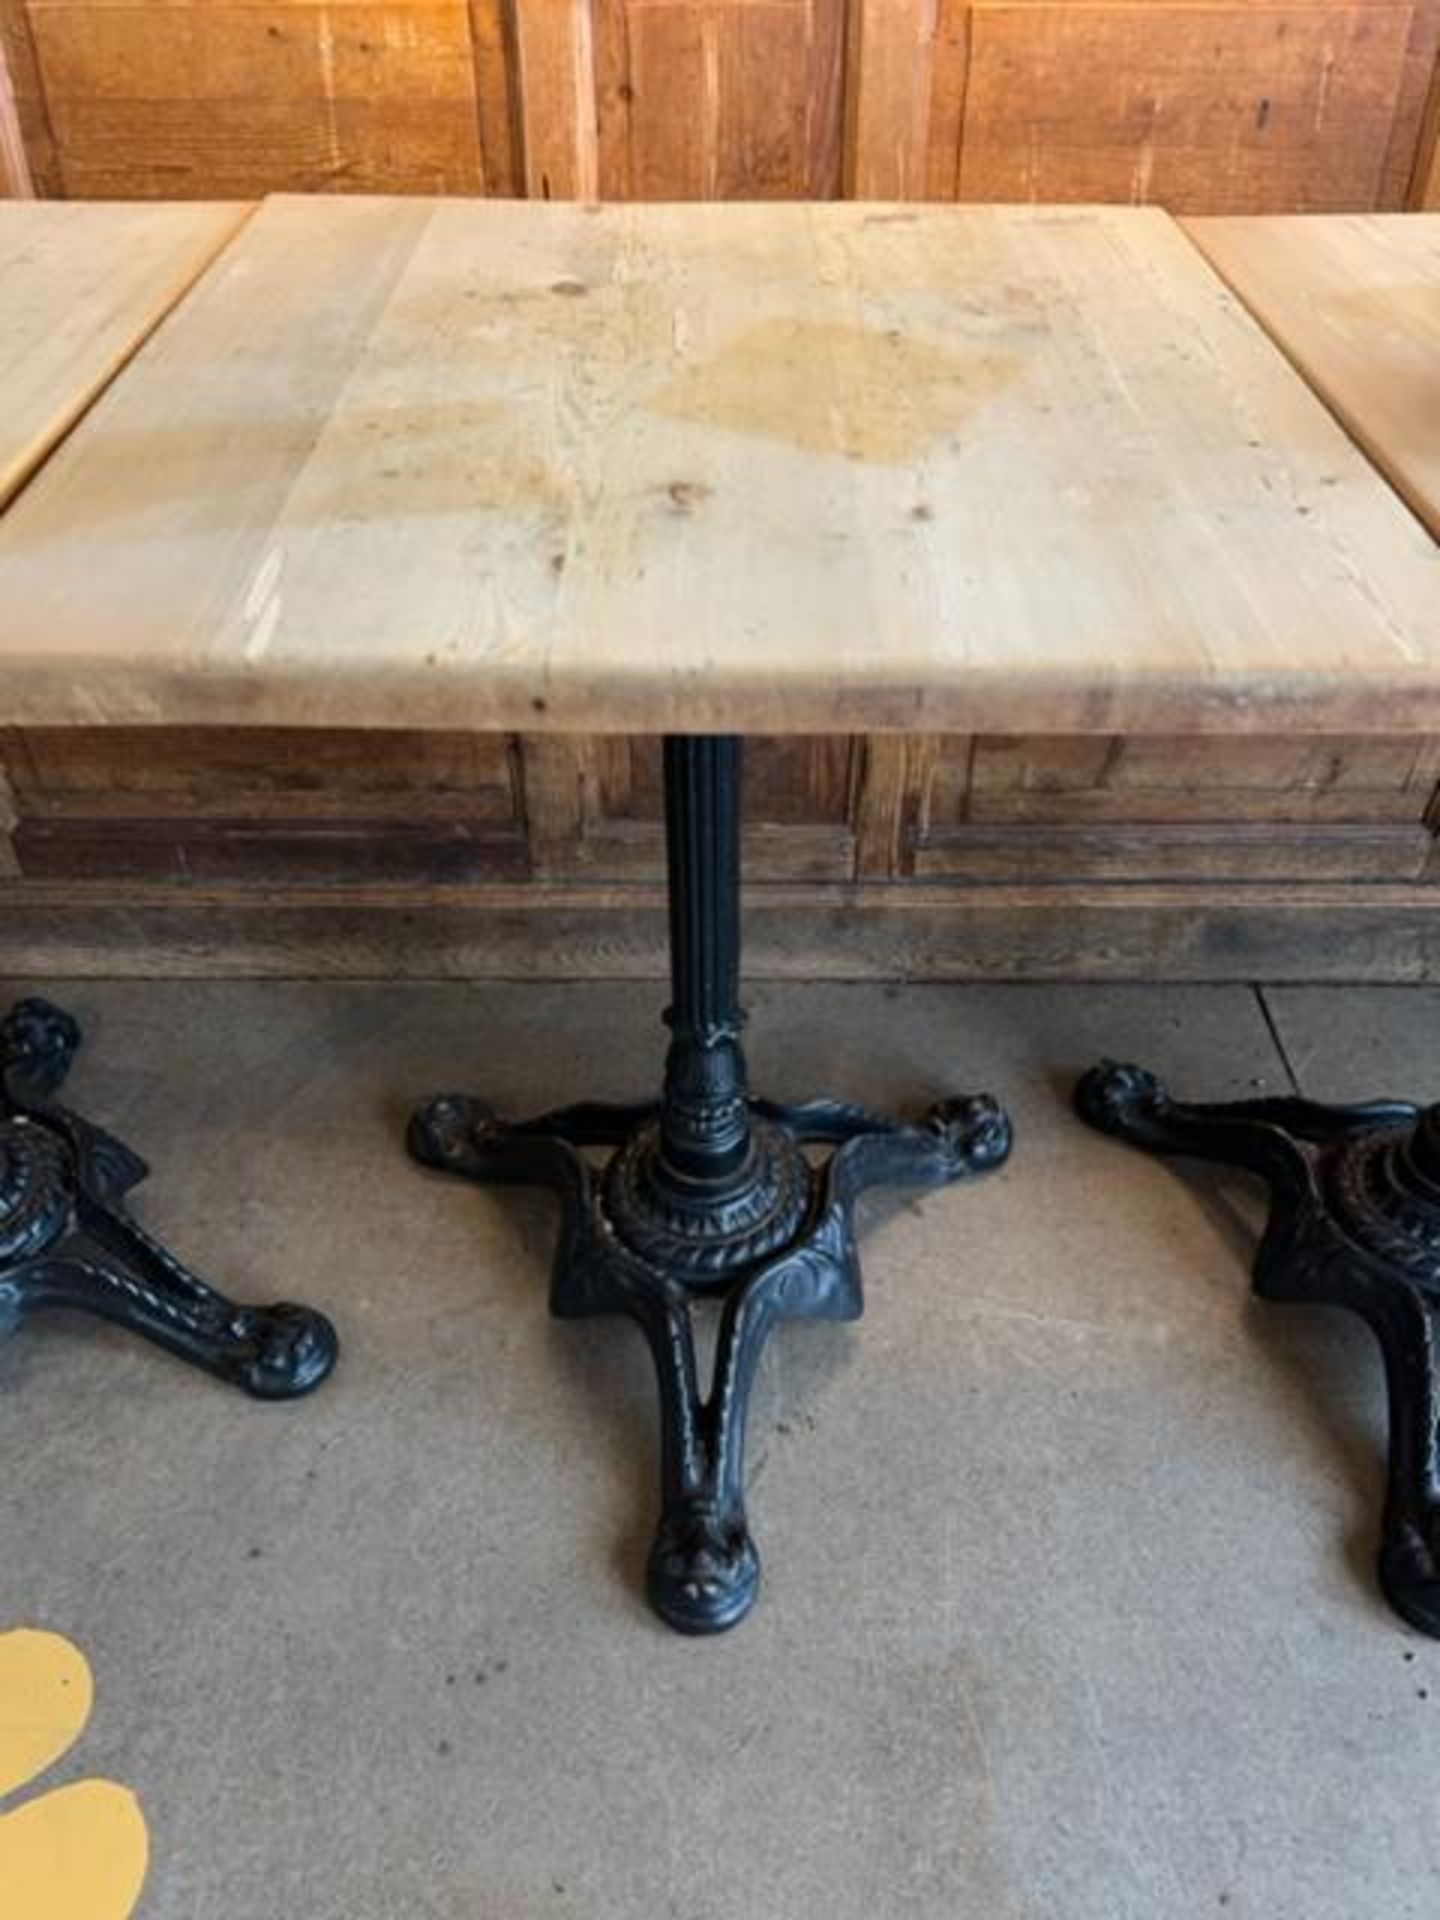 (6) Butcher Block Top Tables with Wrought Iron Bases, 23-1/2" x 23-1/2"